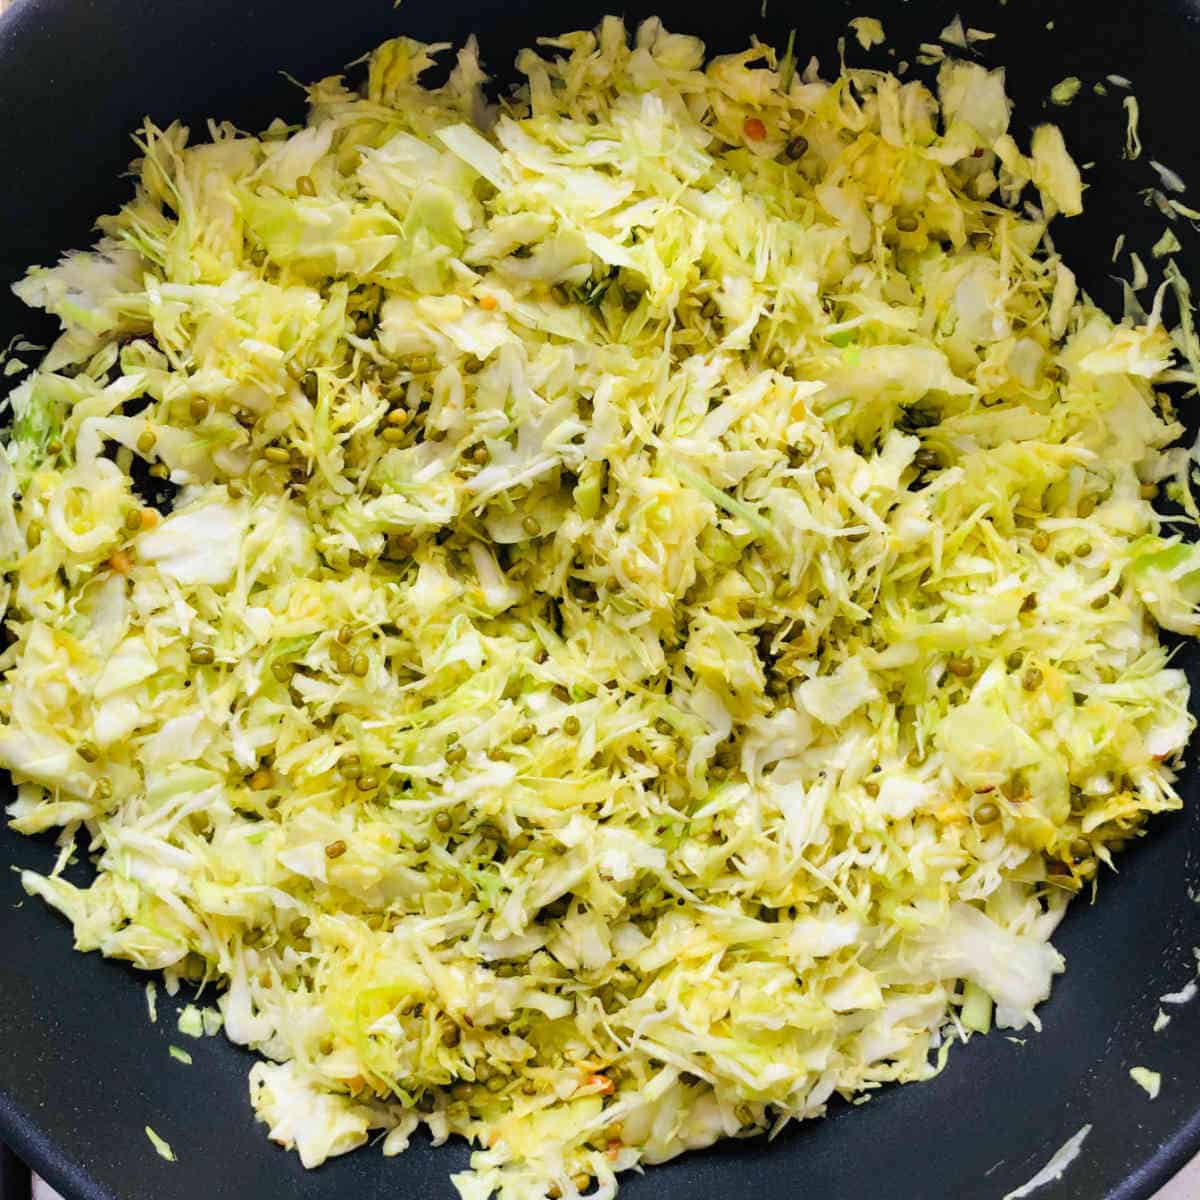 Add cabbage and mix.